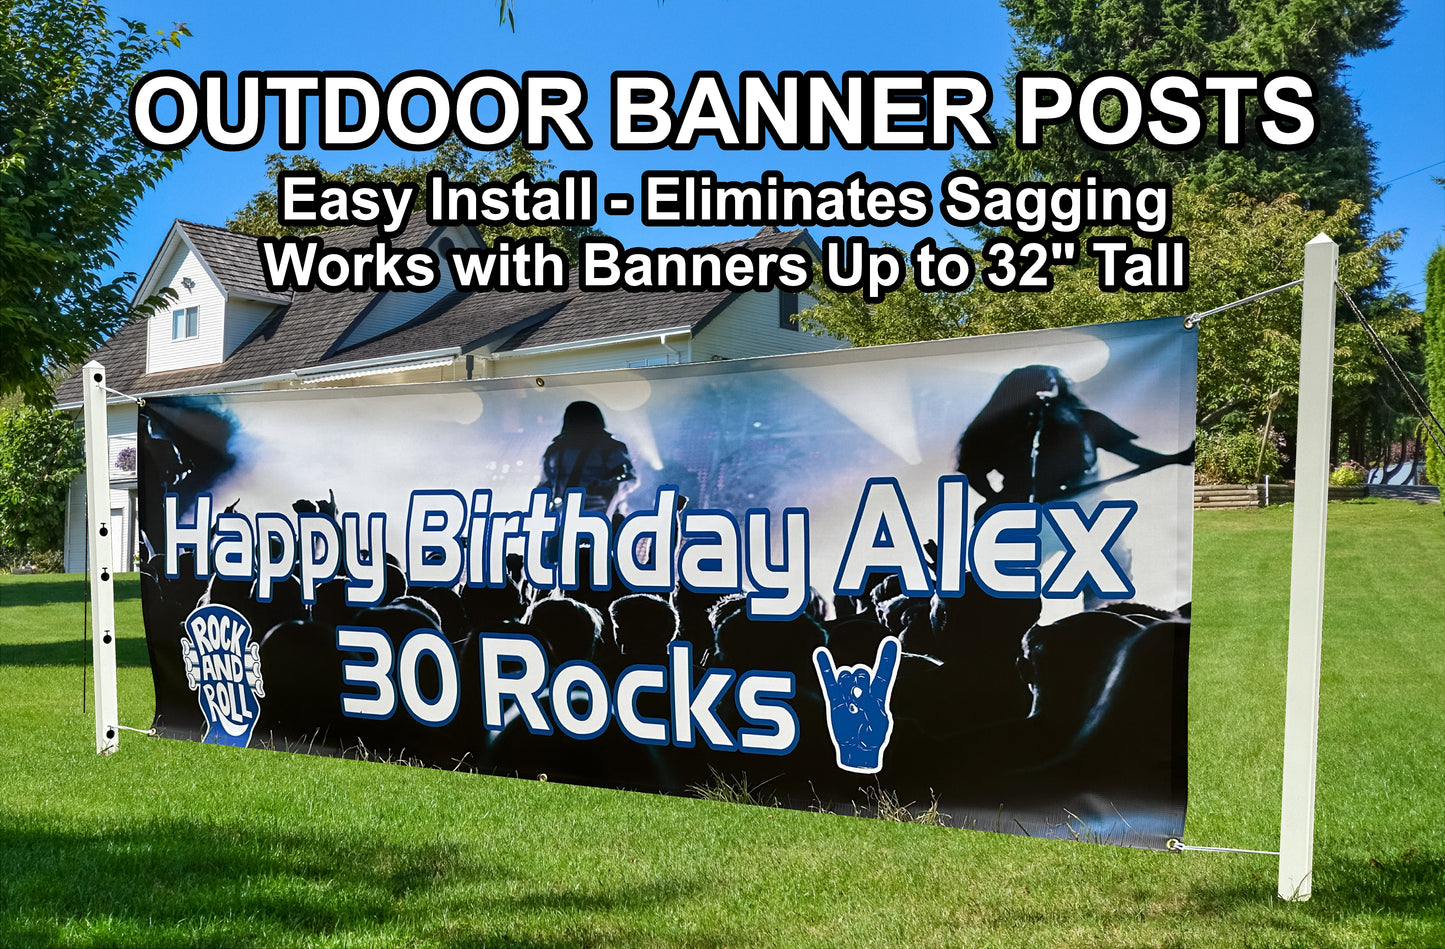 HAPPY BIRTHDAY BANNER, 4 Sizes, Custom Personalized Vinyl Indoor/Outdoor Party Celebration Decoration, Personalize Name and Age, CB107